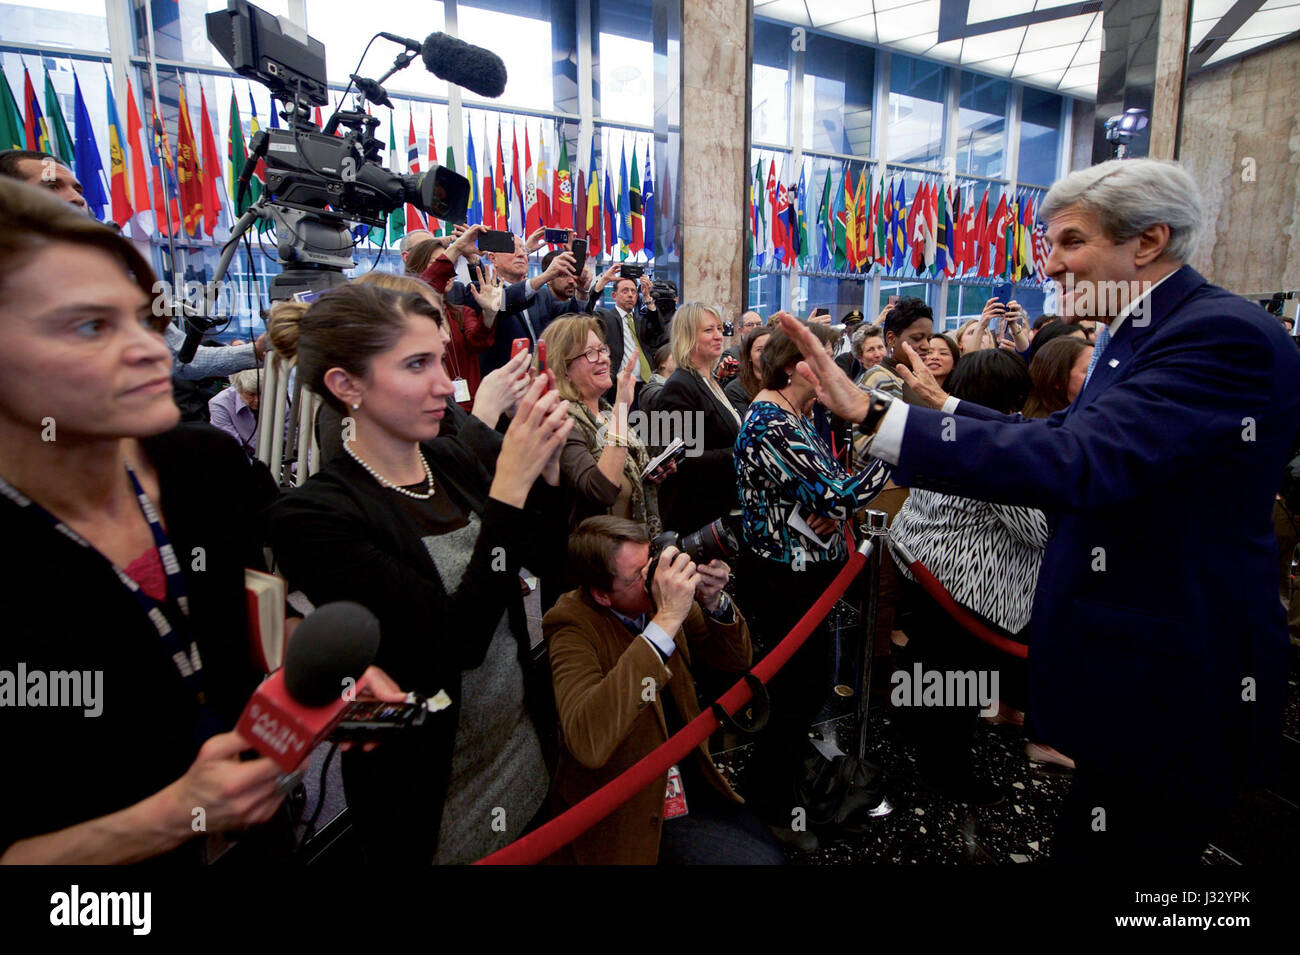 U.S. Secretary of State John Kerry acknowledges members of the Department's press corps as he departs the main lobby of the Department's Harry S. Truman Building after delivering farewell remarks to employees on January 19, 2017. Stock Photo